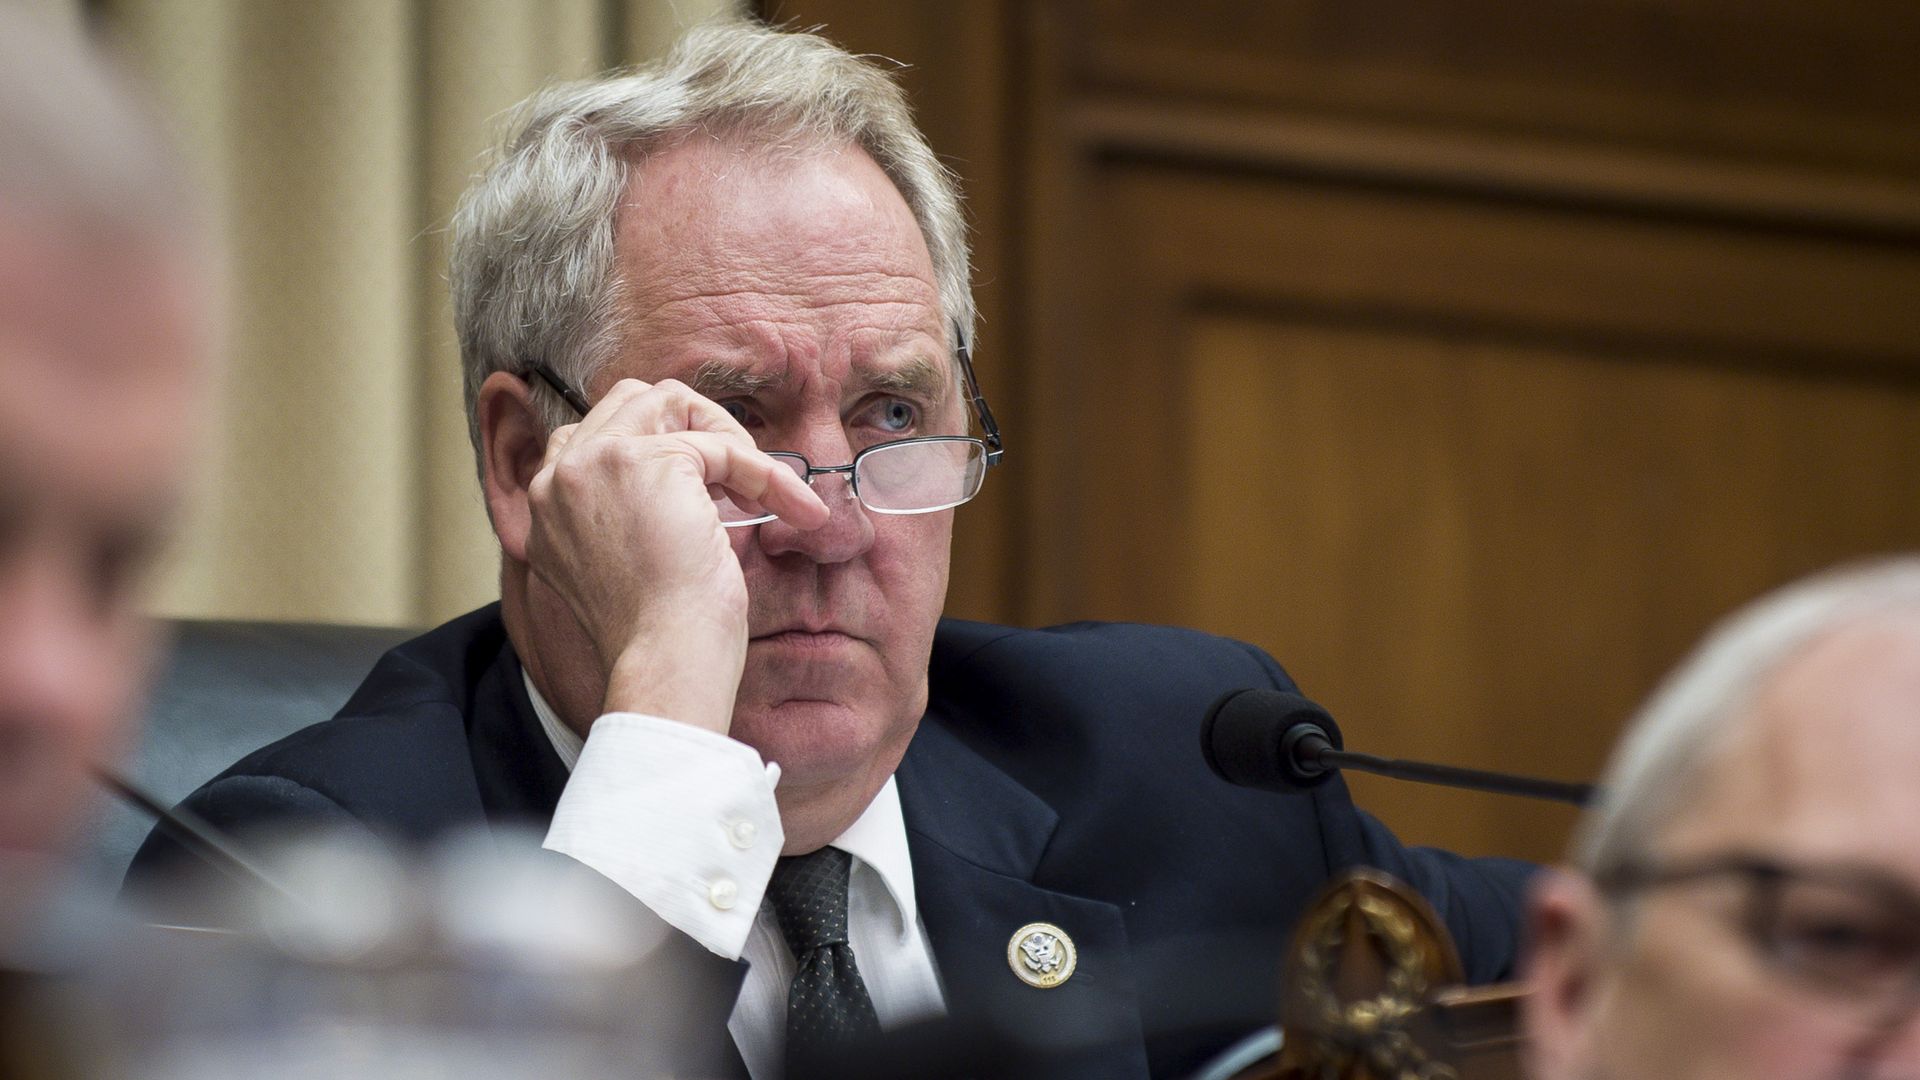 In this image, Shimkus adjusts his glasses while at a hearing. He's wearing a suit.